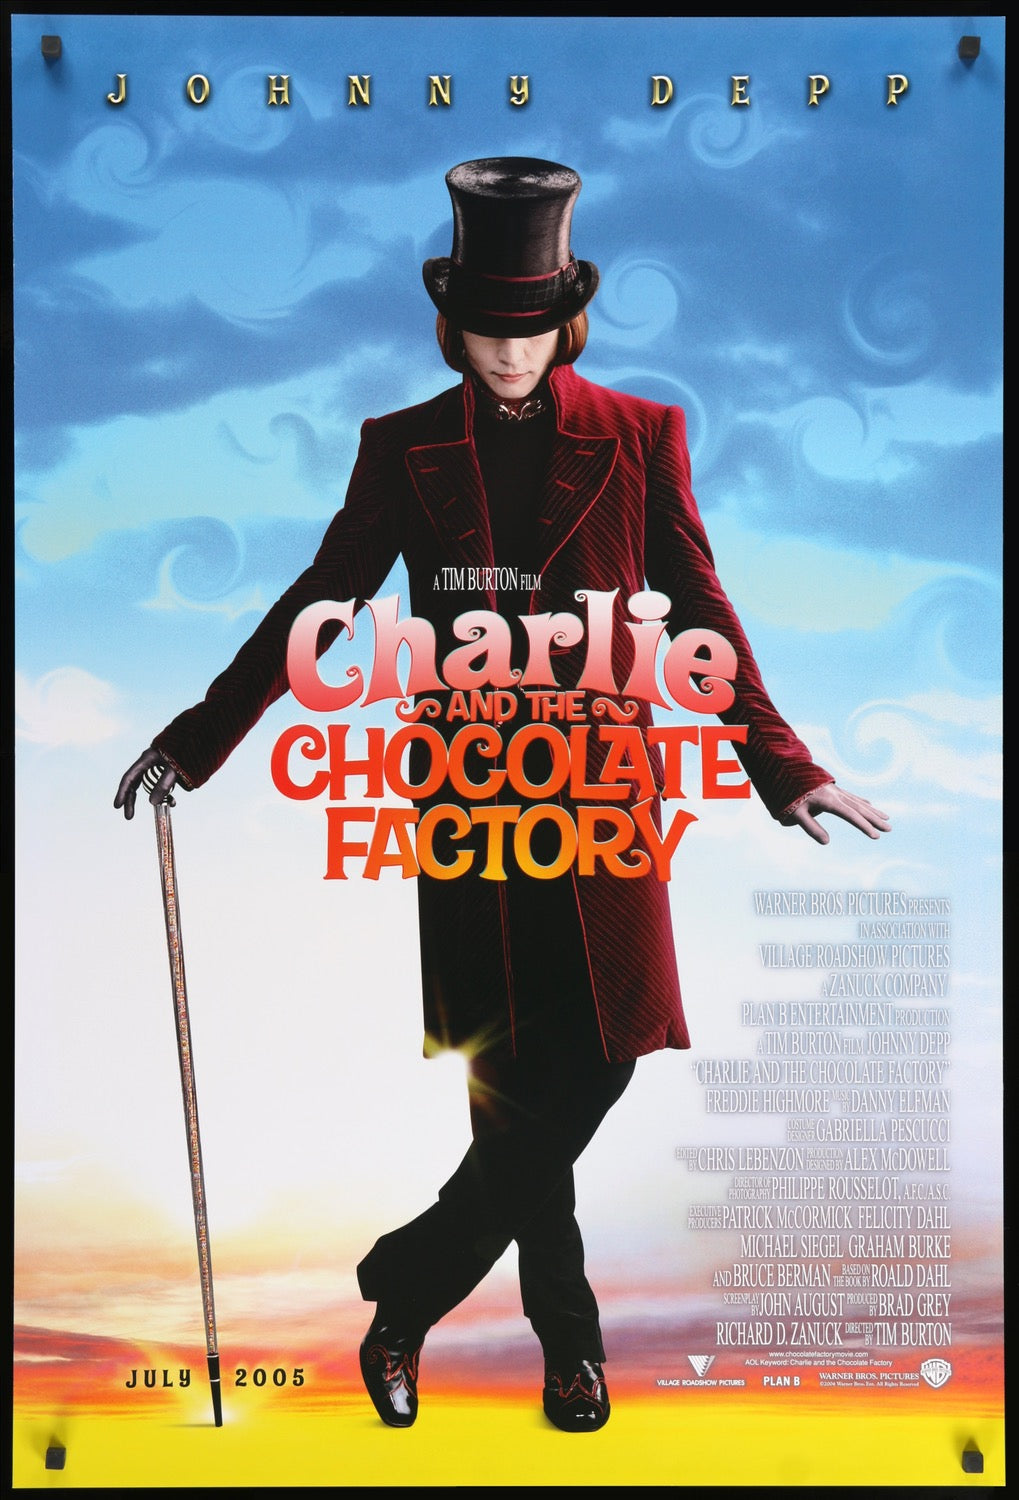 Poster　the　Vintage　Chocolate　Art　Movie　Movie　Factory　(2005)　One-Sheet　Film　Original　Posters　Charlie　and